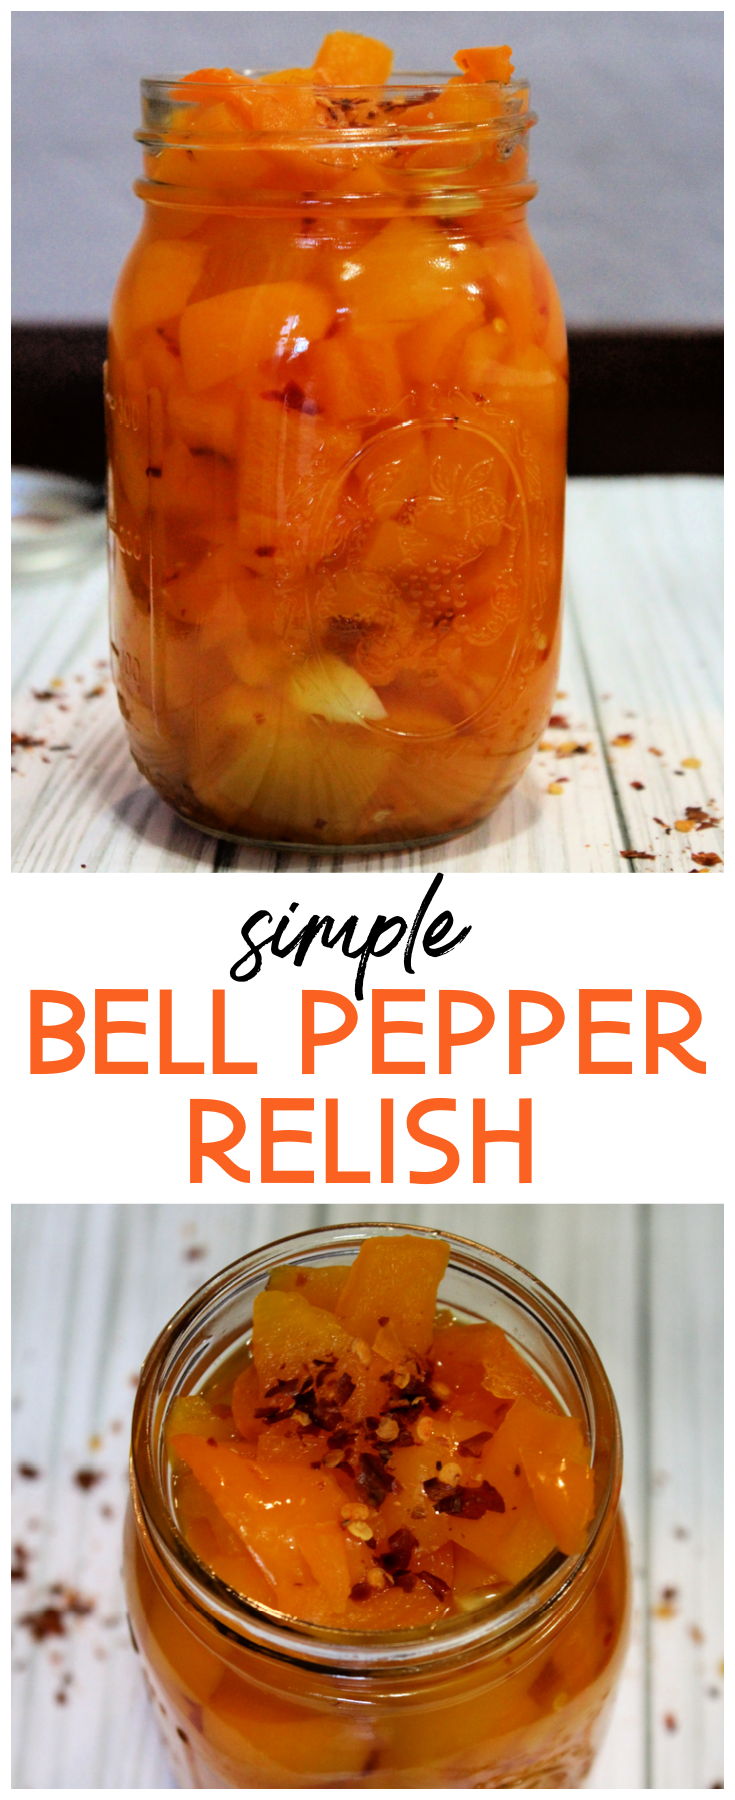 Simple Bell Pepper Relish